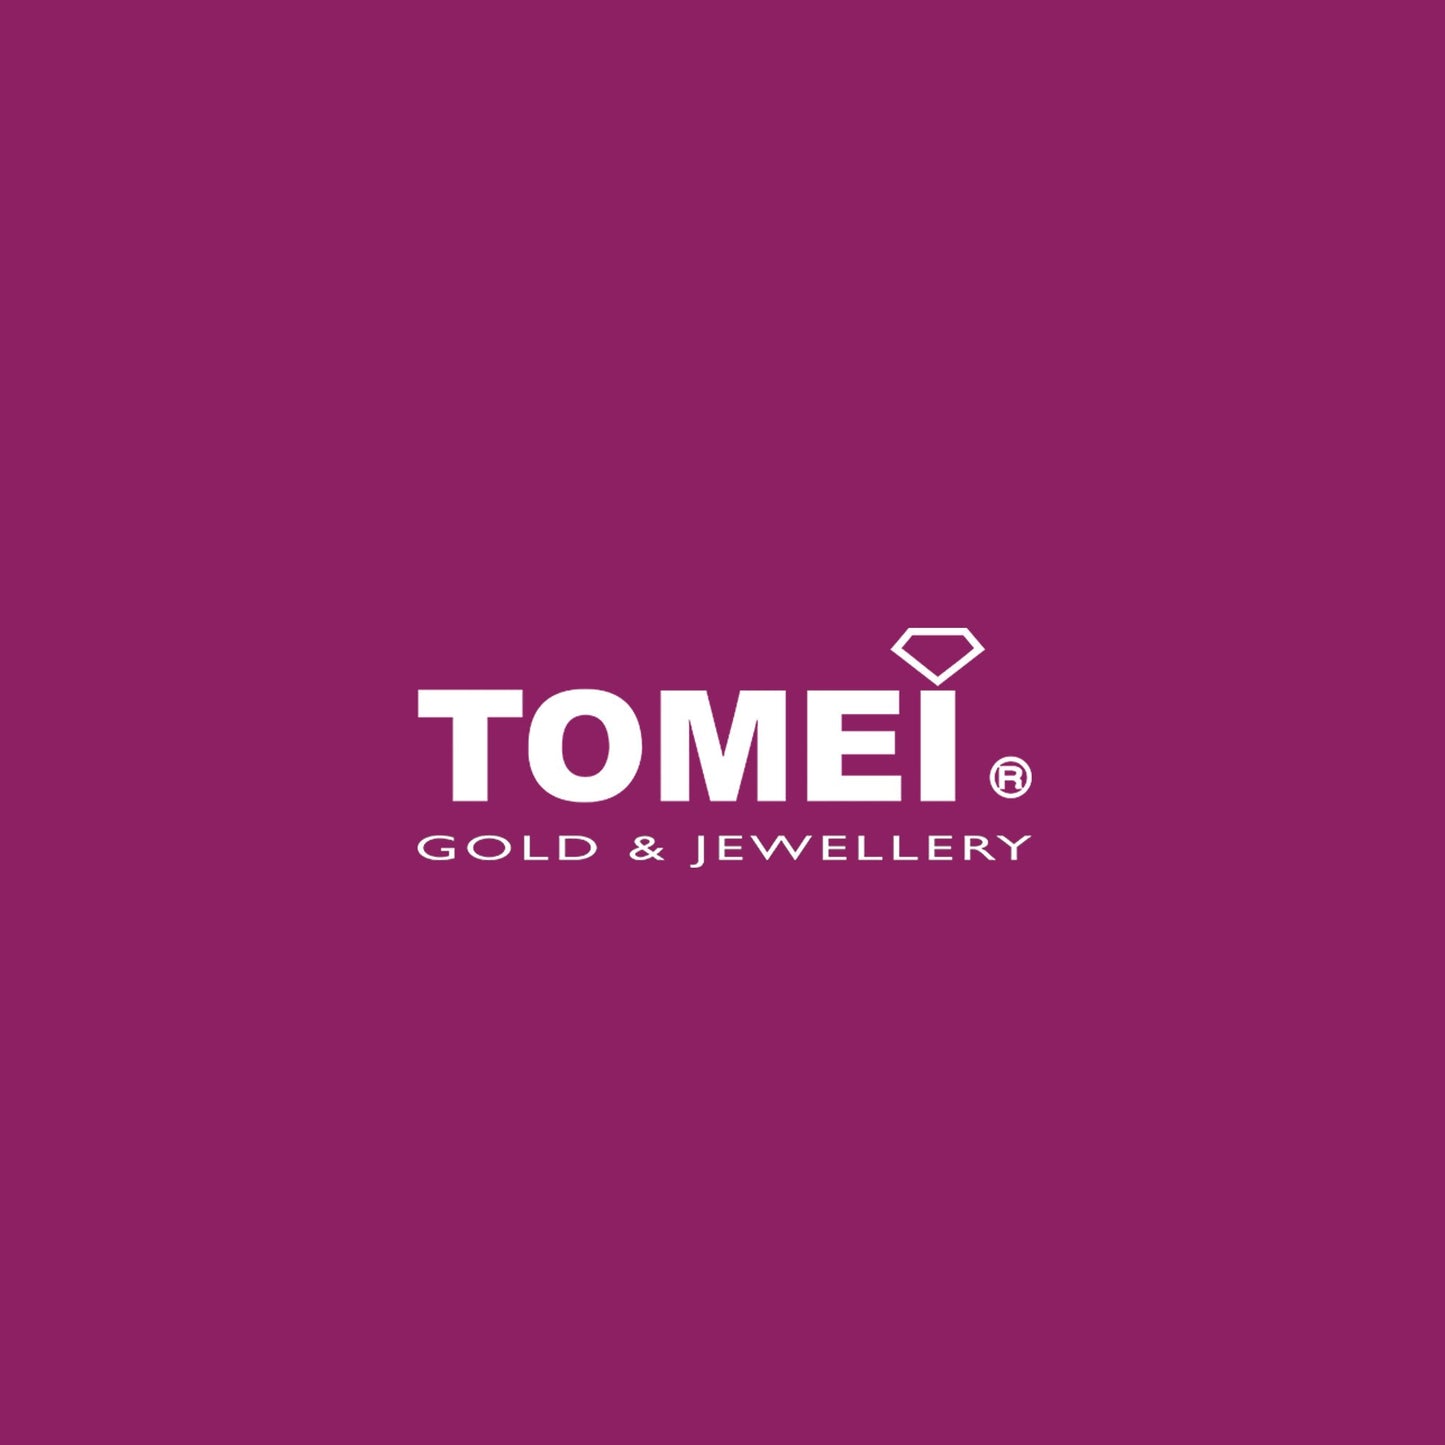 TOMEI Bee Linked Chain Bracelet, Yellow Gold 916